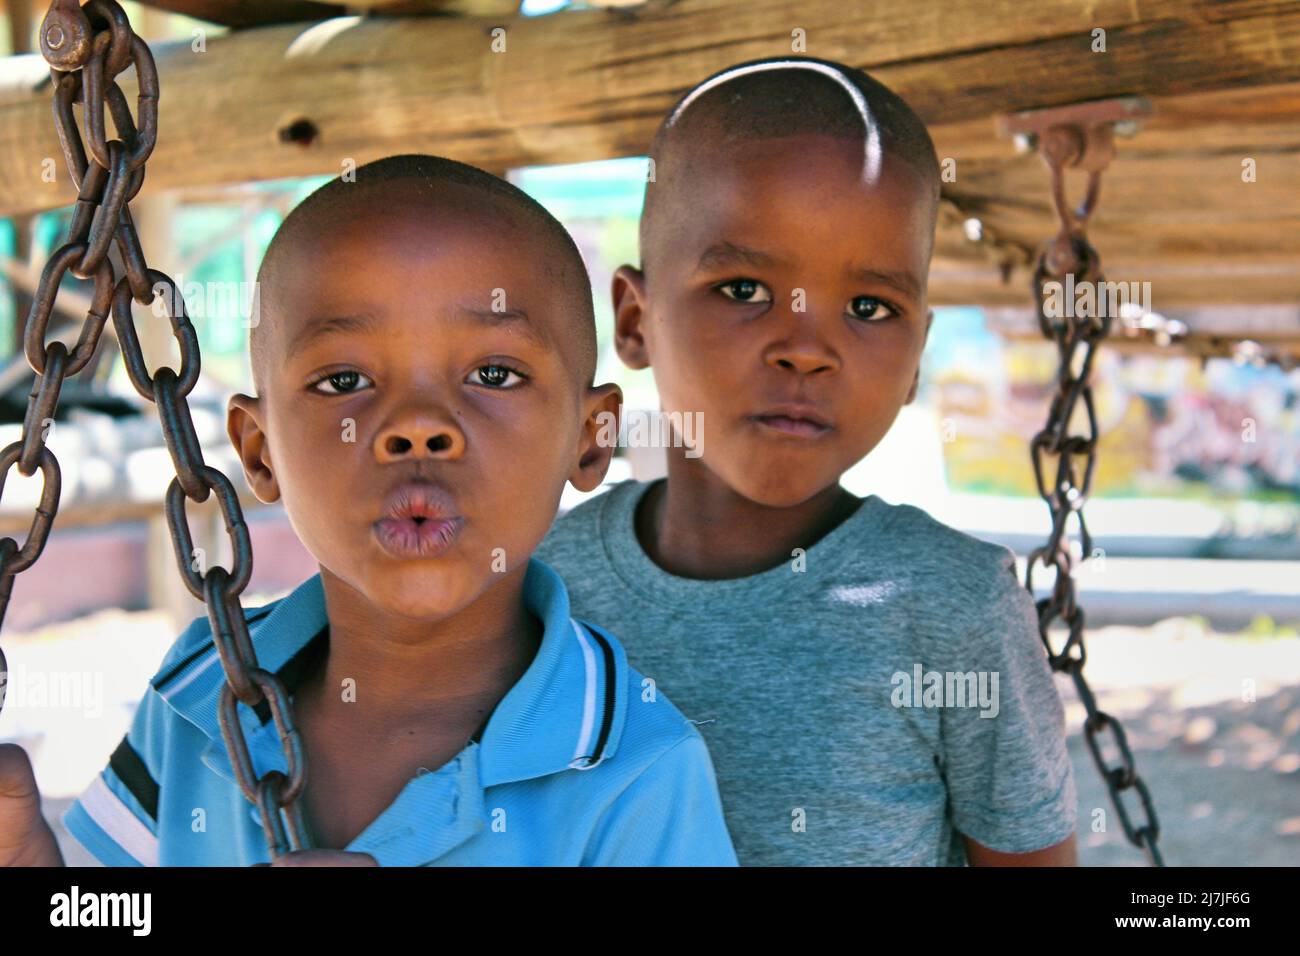 Gaborone. 14th Apr, 2022. Children play at the FirstBontleng Futsal Park in Botswana's capital city Gaborone on April 14, 2022. TO GO WITH 'Feature: Botswana's futsal park offers more than sports to children' Credit: Sharon Tshipa/Xinhua/Alamy Live News Stock Photo